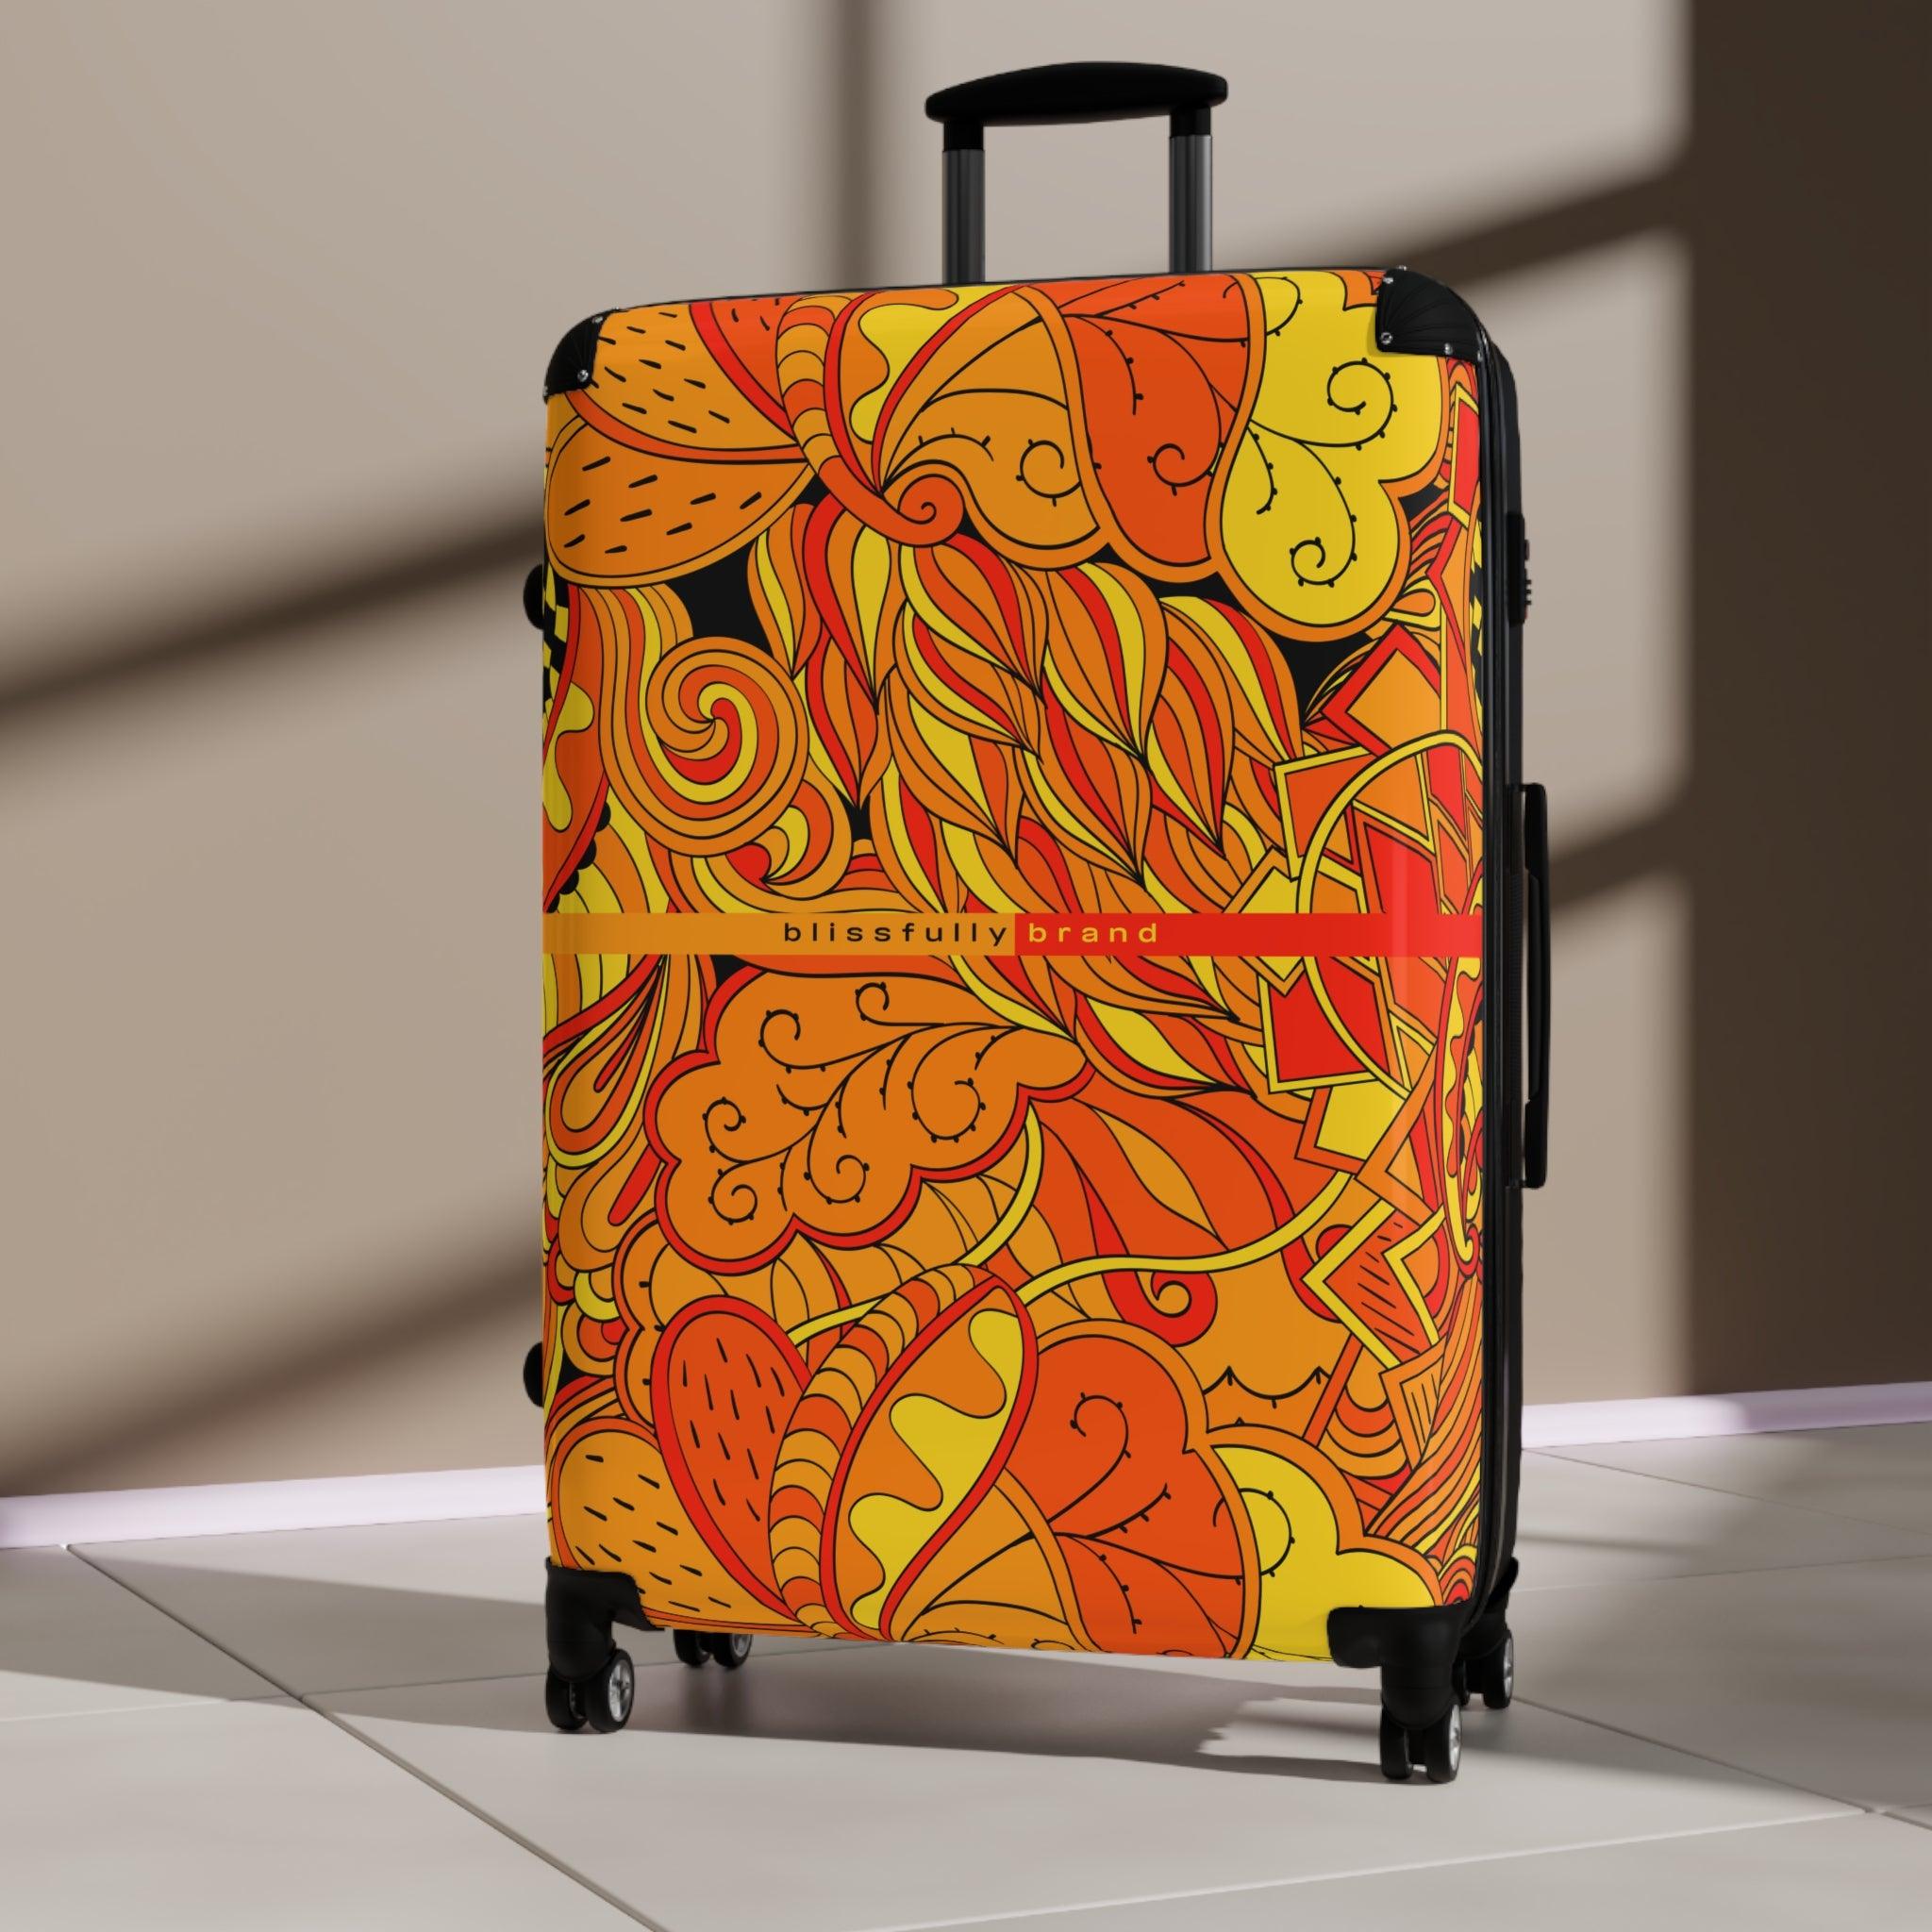 Mandra Luggage Collection - Blissfully Brand